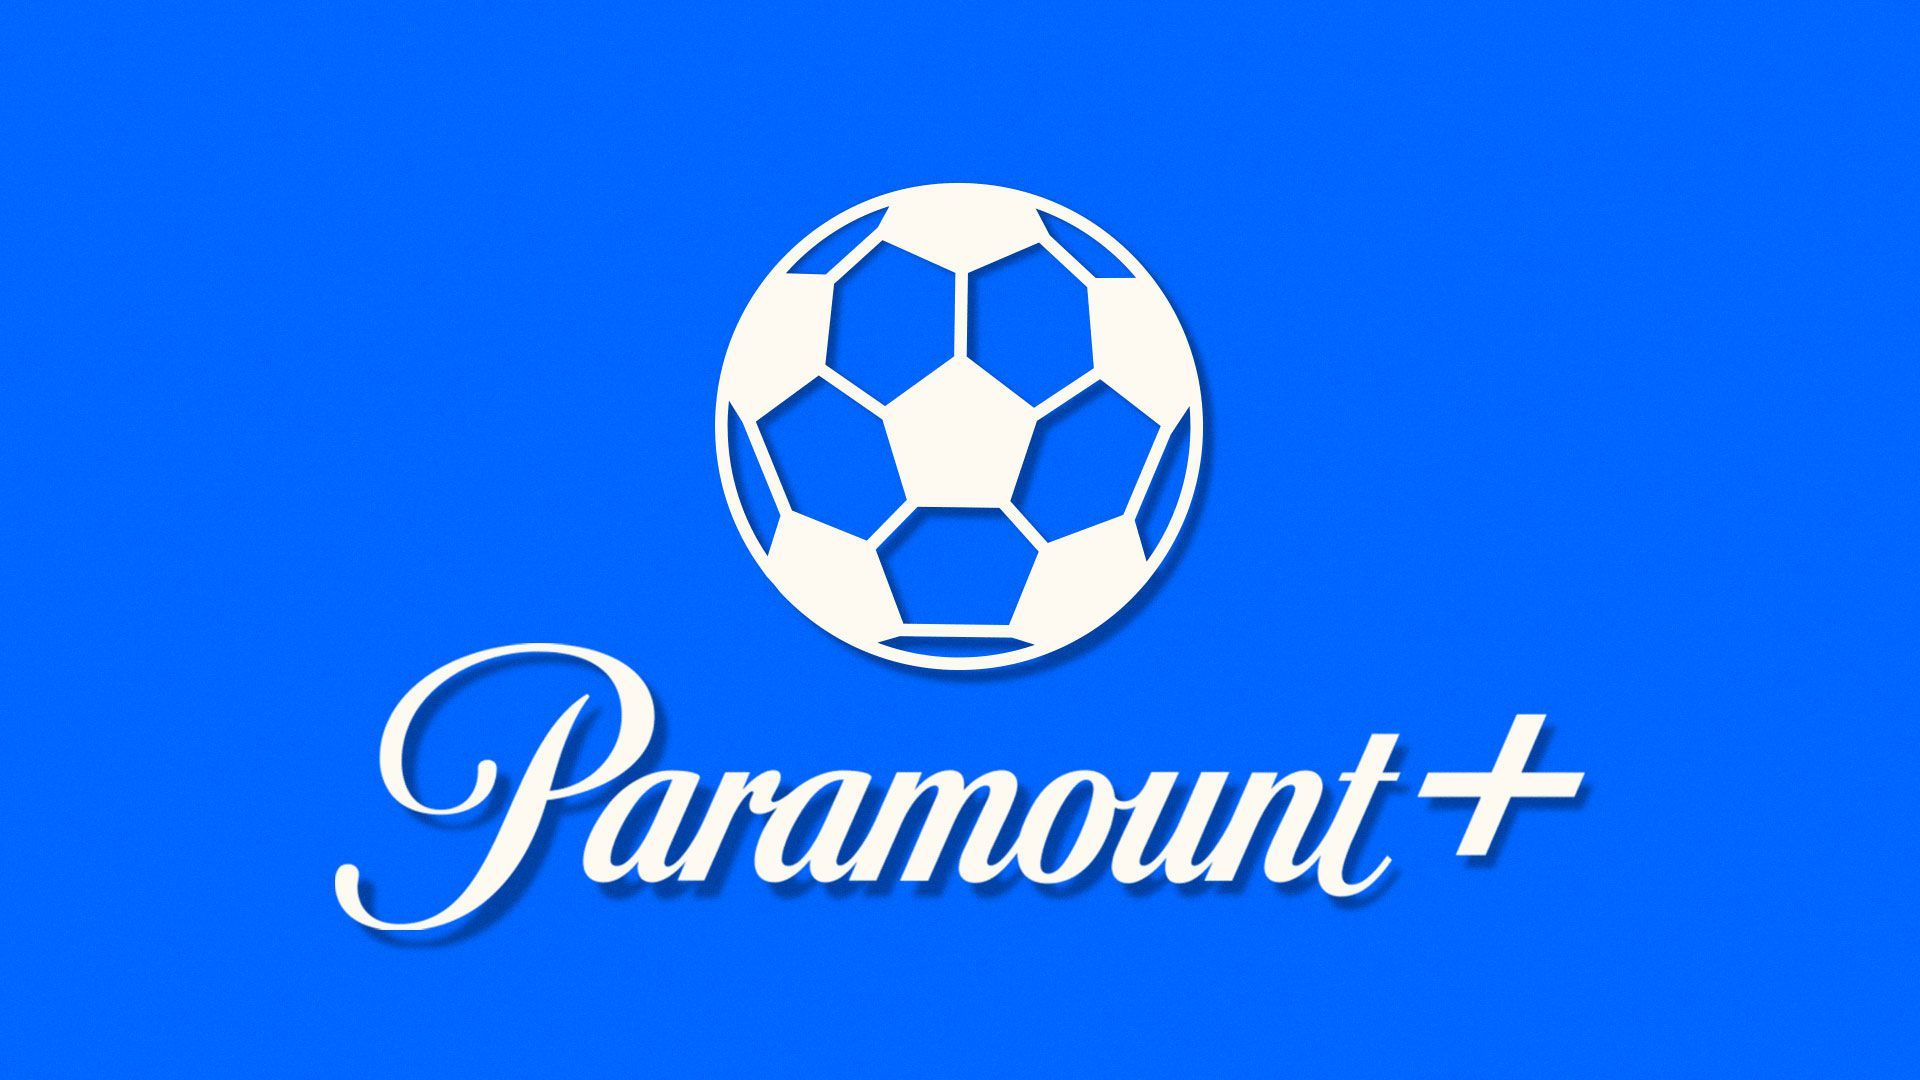 Illustration of Paramount + Logo with a soccer ball replacing the mountains